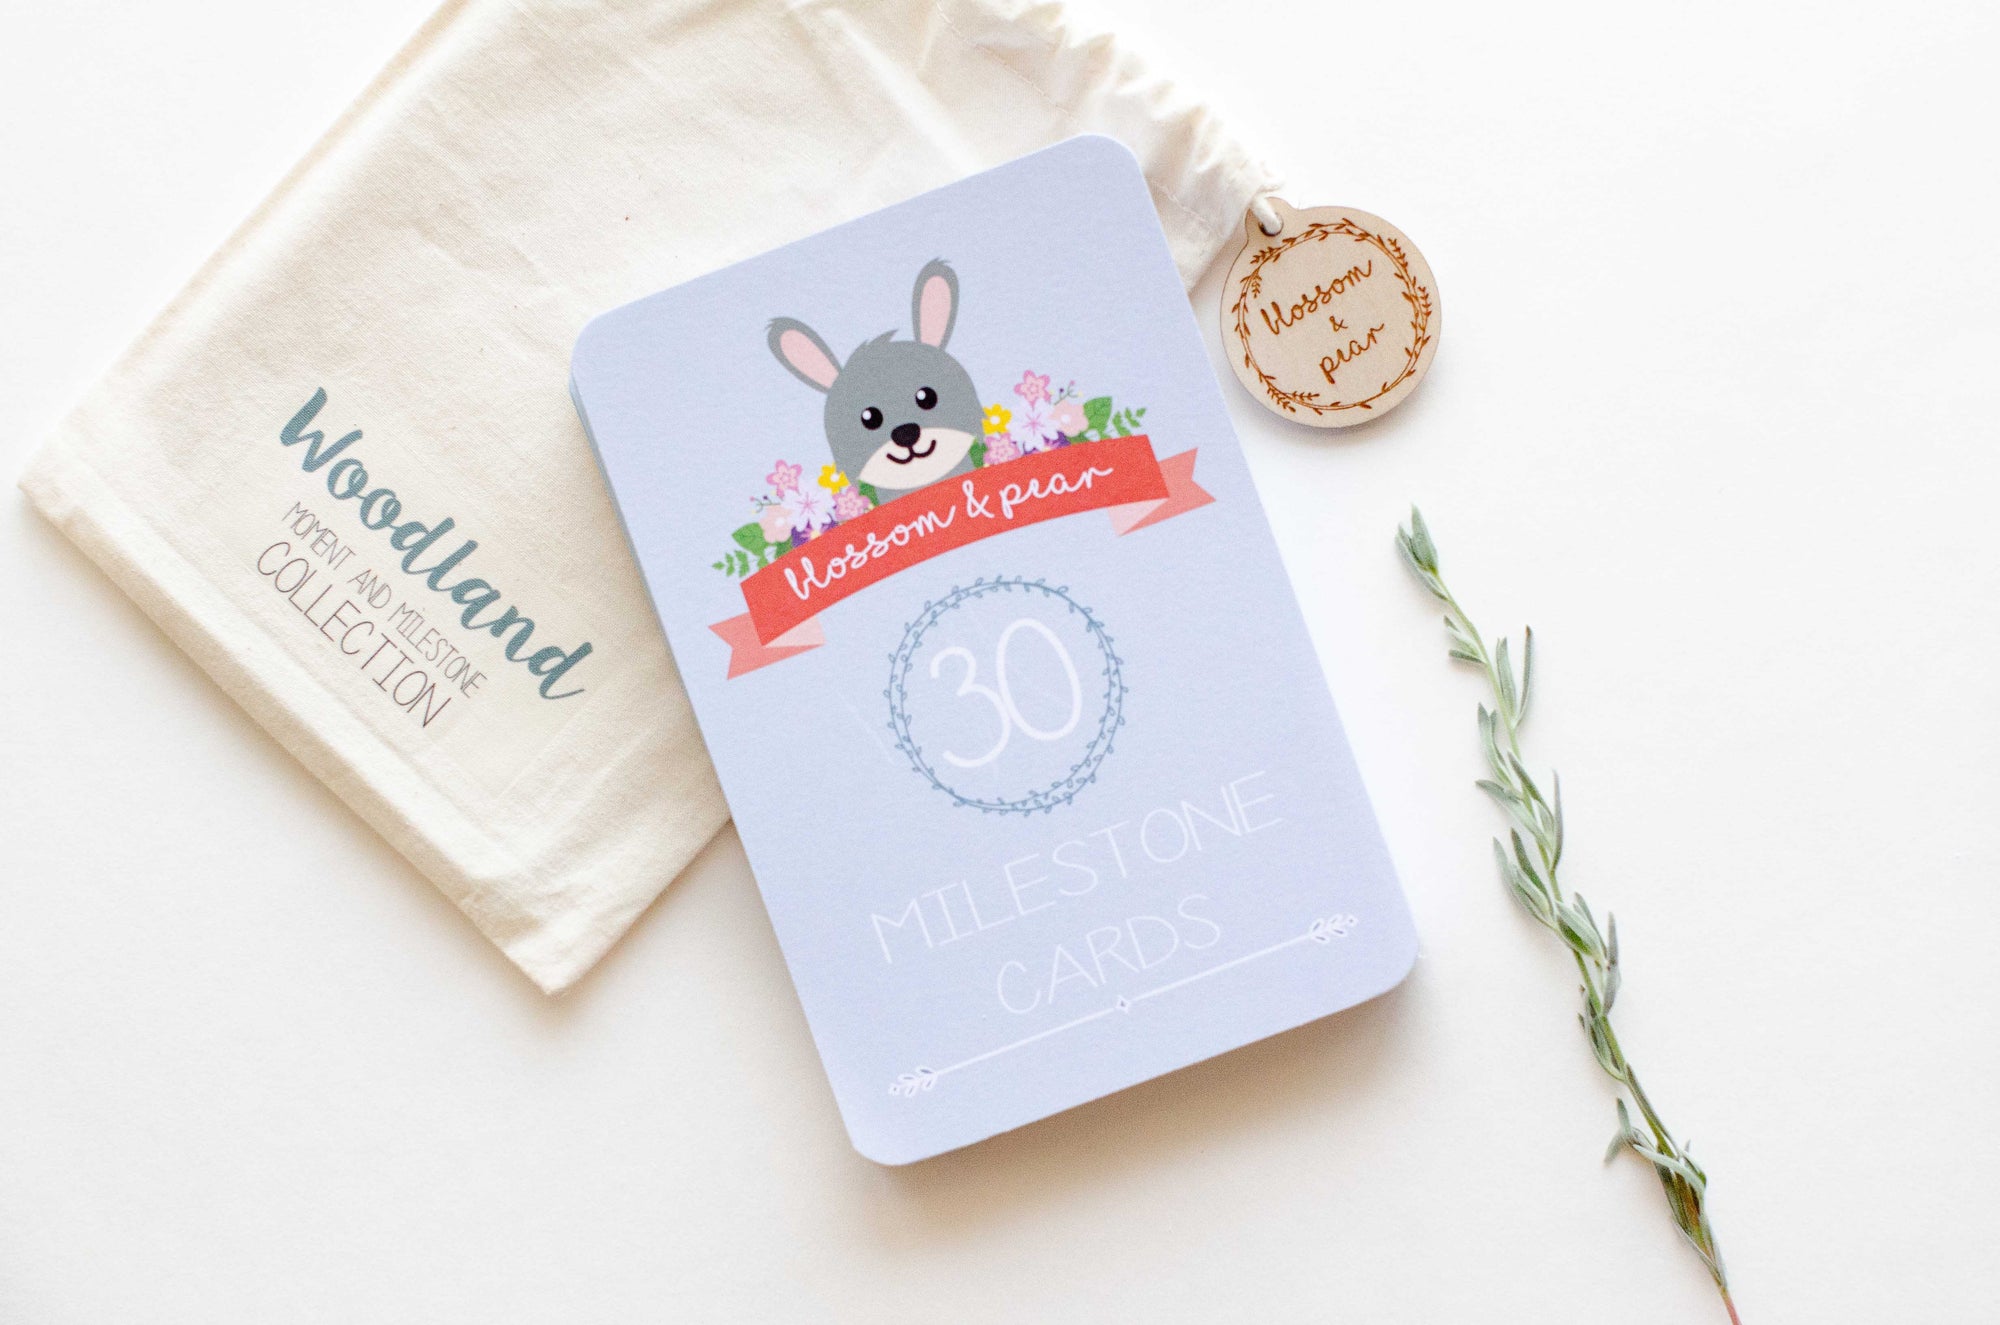 Blossom + Pear - Woodland Baby Moment and Milestone Cards - Seedling & Co.